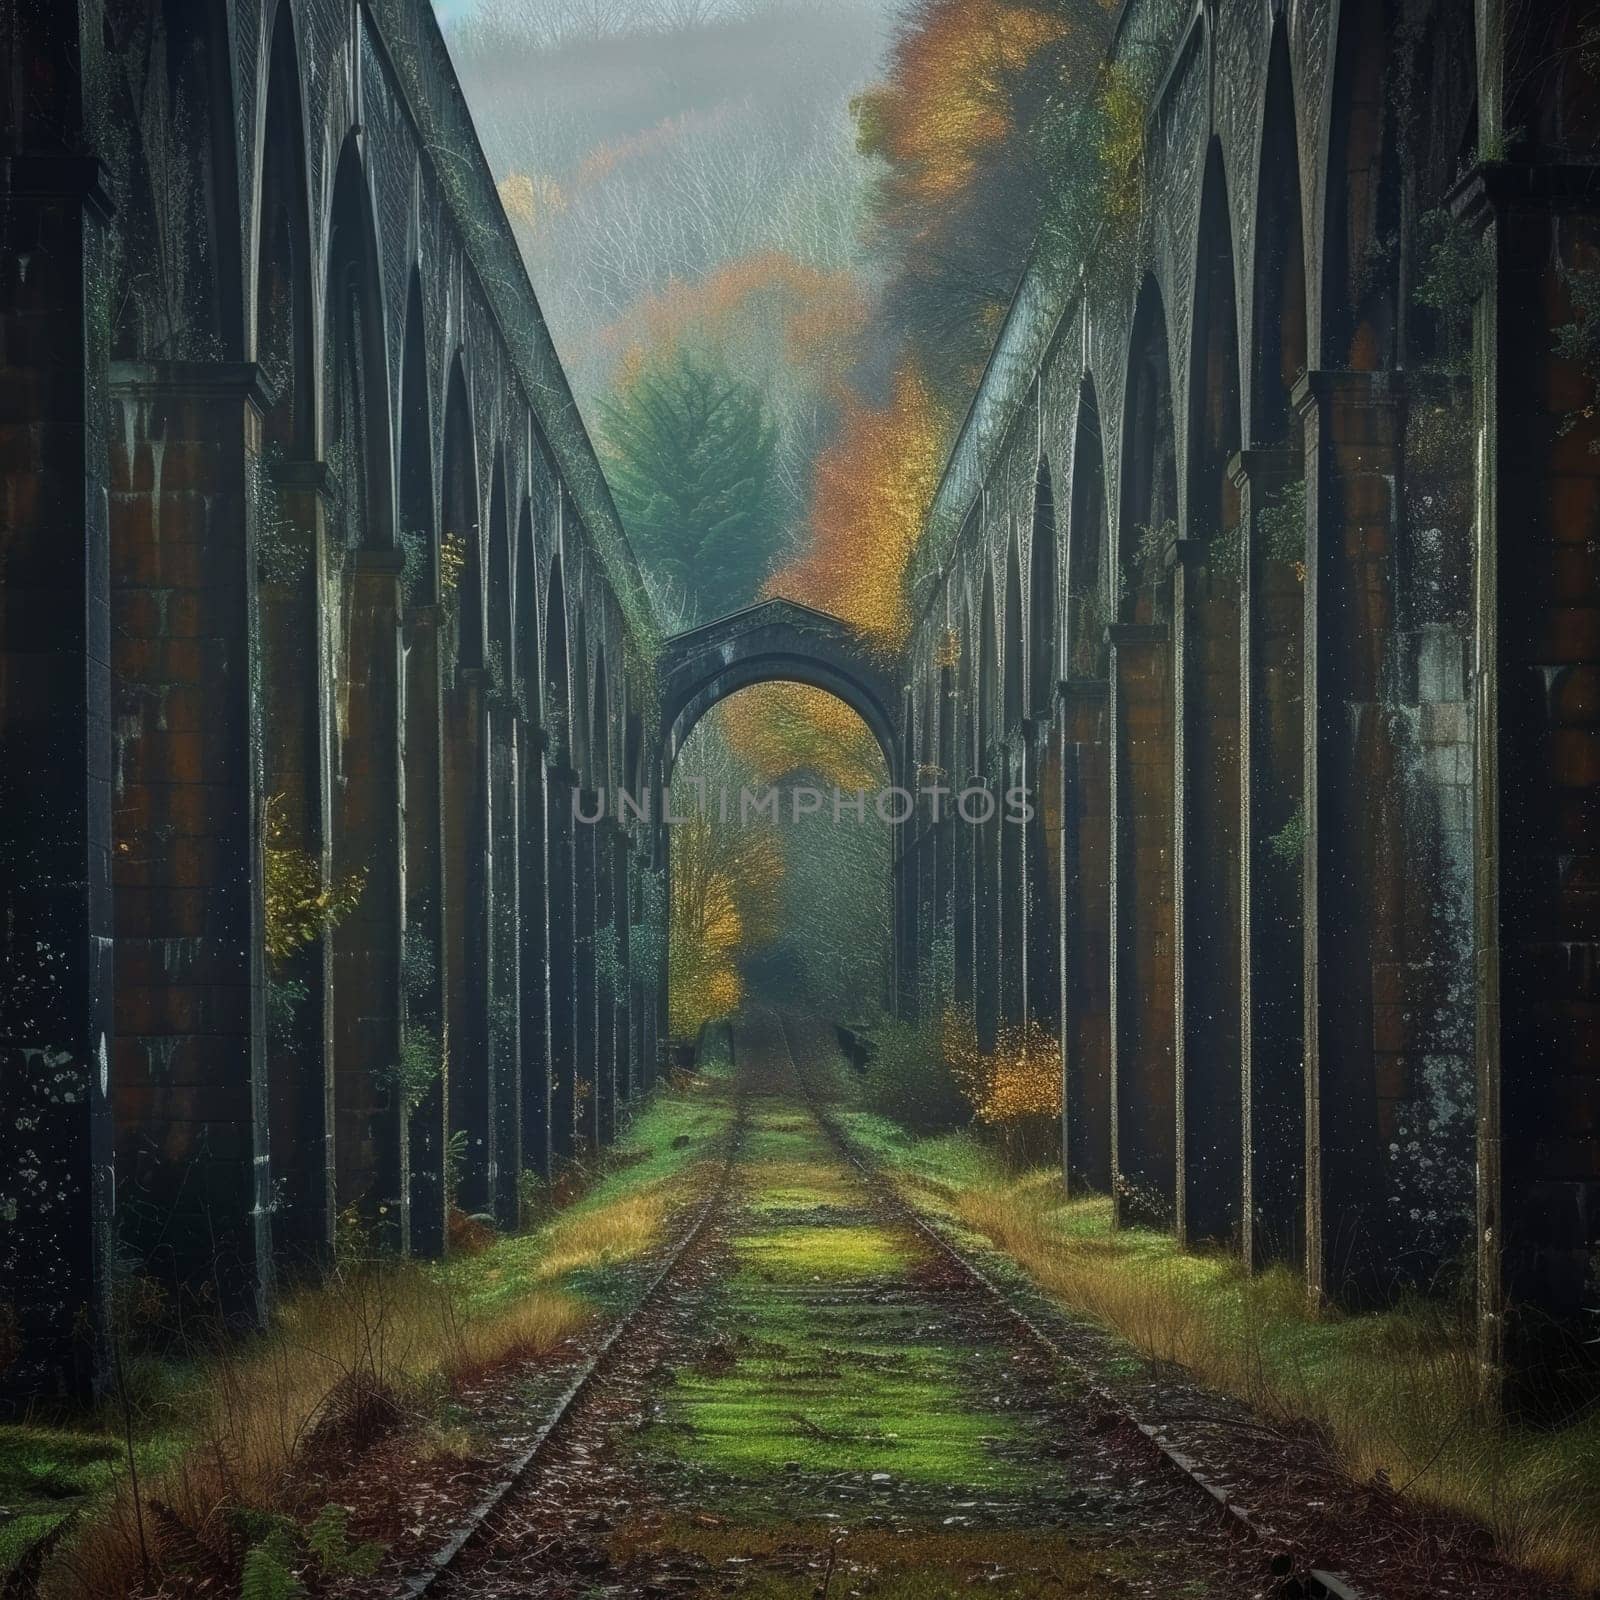 Overgrown railway under a grand arch, surrounded by autumnal trees and a mystical fog